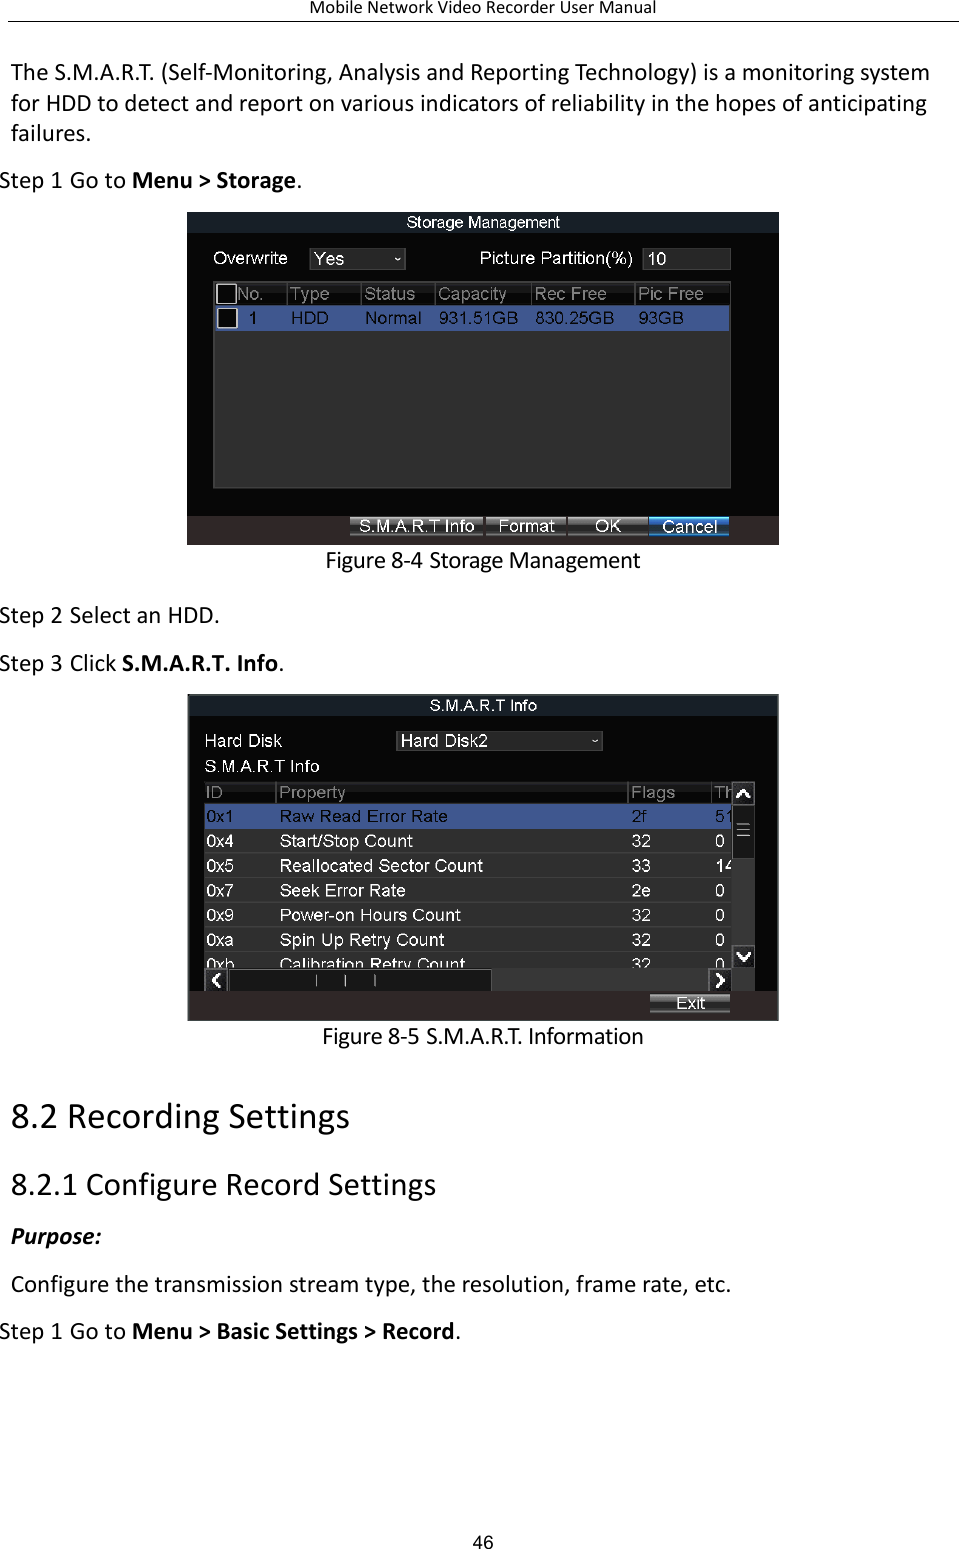 Mobile Network Video Recorder User Manual 46 The S.M.A.R.T. (Self-Monitoring, Analysis and Reporting Technology) is a monitoring system for HDD to detect and report on various indicators of reliability in the hopes of anticipating failures. Step 1 Go to Menu &gt; Storage.  Figure 8-4 Storage Management Step 2 Select an HDD. Step 3 Click S.M.A.R.T. Info.  Figure 8-5 S.M.A.R.T. Information 8.2 Recording Settings 8.2.1 Configure Record Settings Purpose:   Configure the transmission stream type, the resolution, frame rate, etc. Step 1 Go to Menu &gt; Basic Settings &gt; Record. 